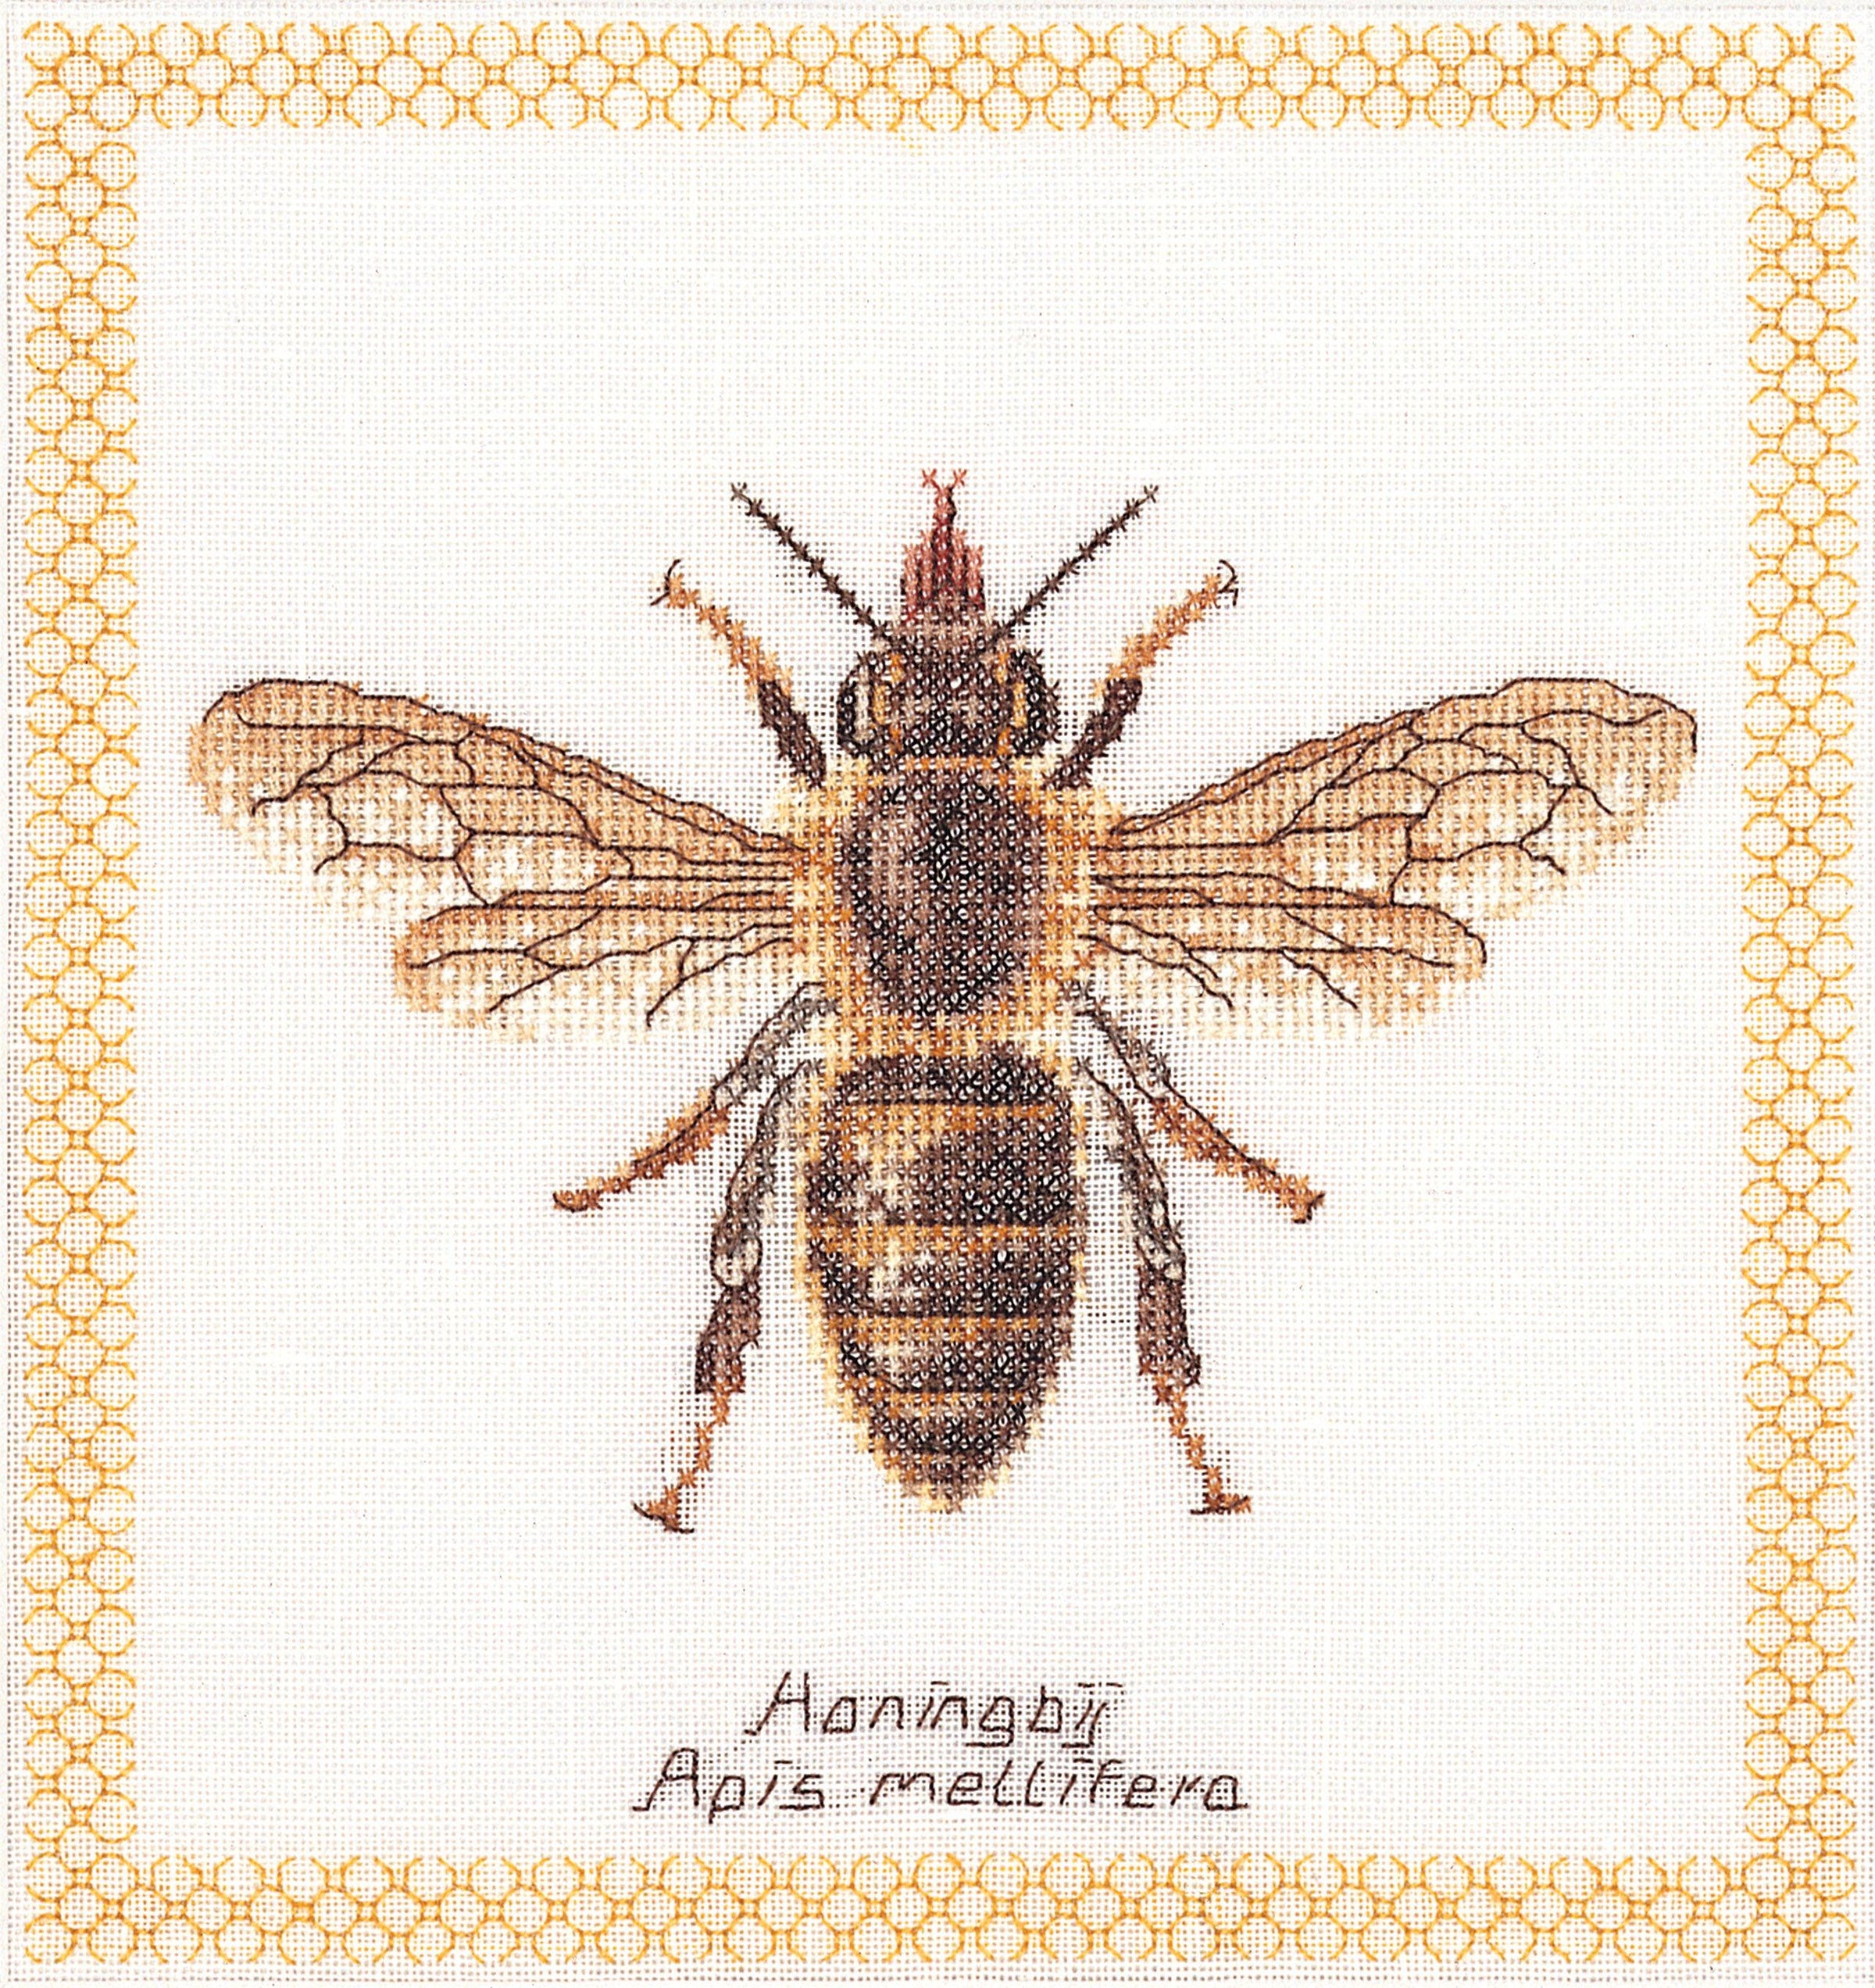 Thea Gouverneur - Counted Cross Stitch Kit - Honey Bee - Aida - 16 count - 3017A - Thea Gouverneur Since 1959